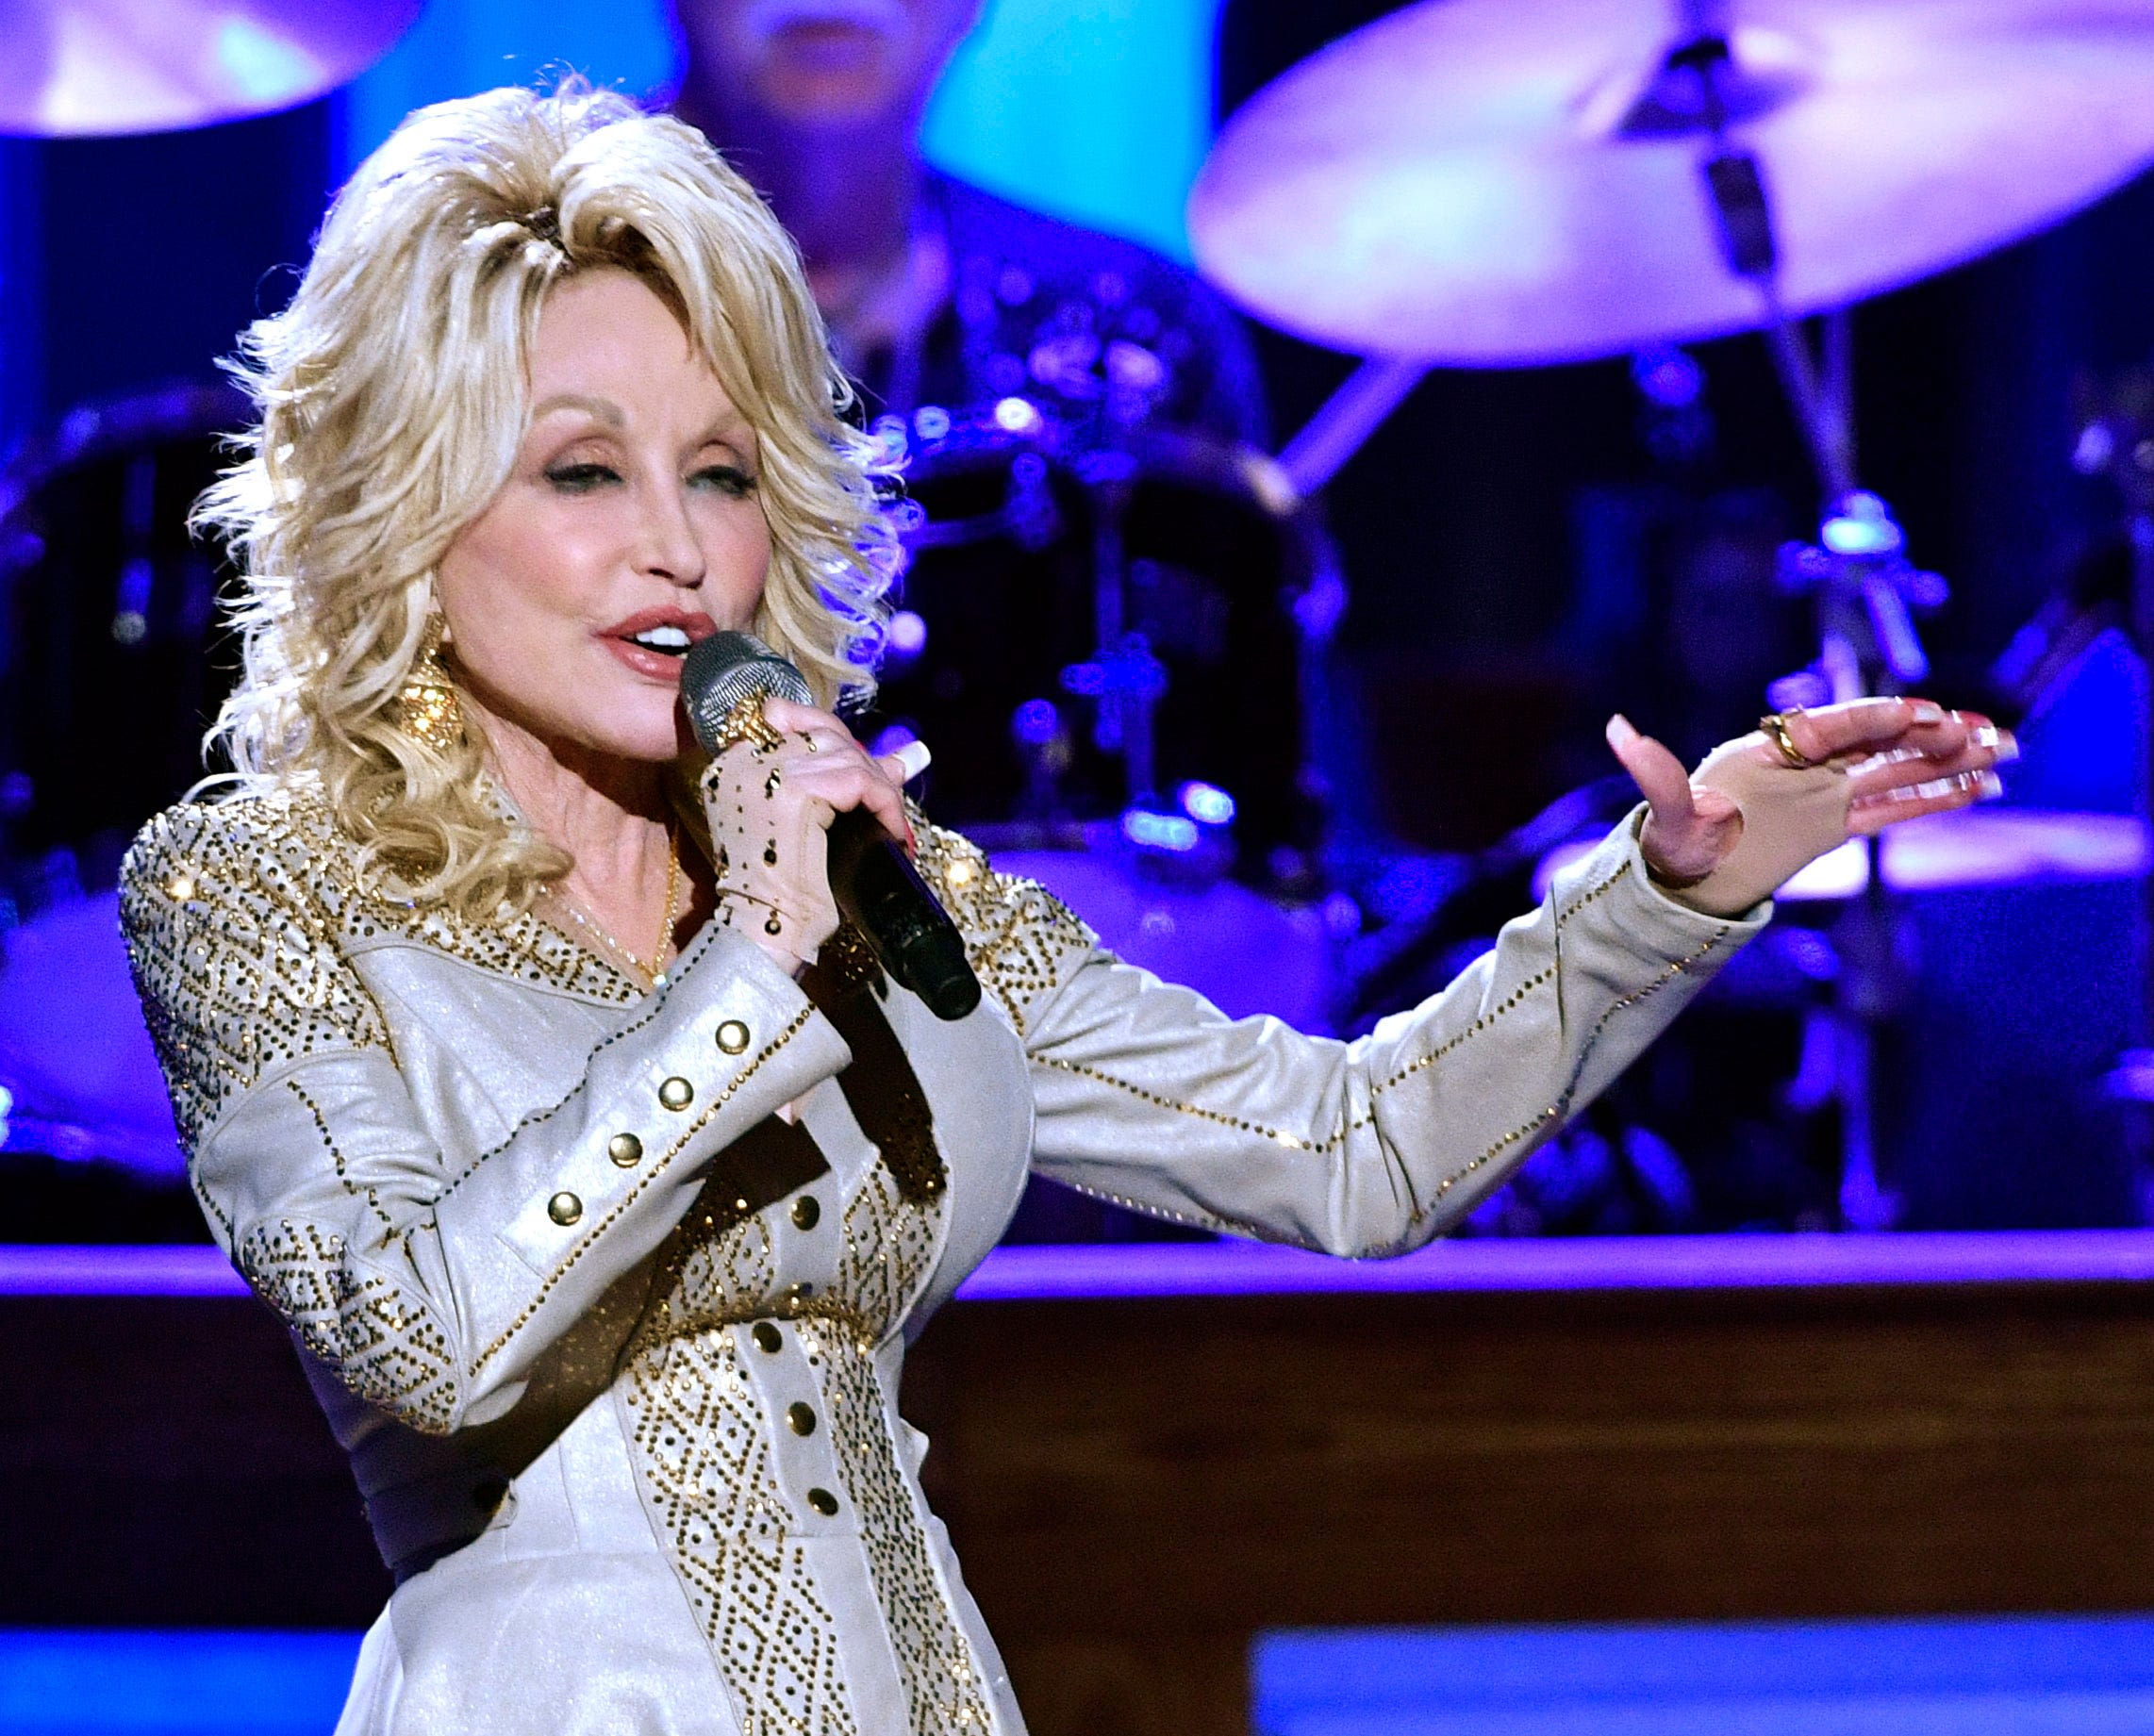 Dolly Parton says she wants to appear in Jennifer Aniston's '9 to 5' remake